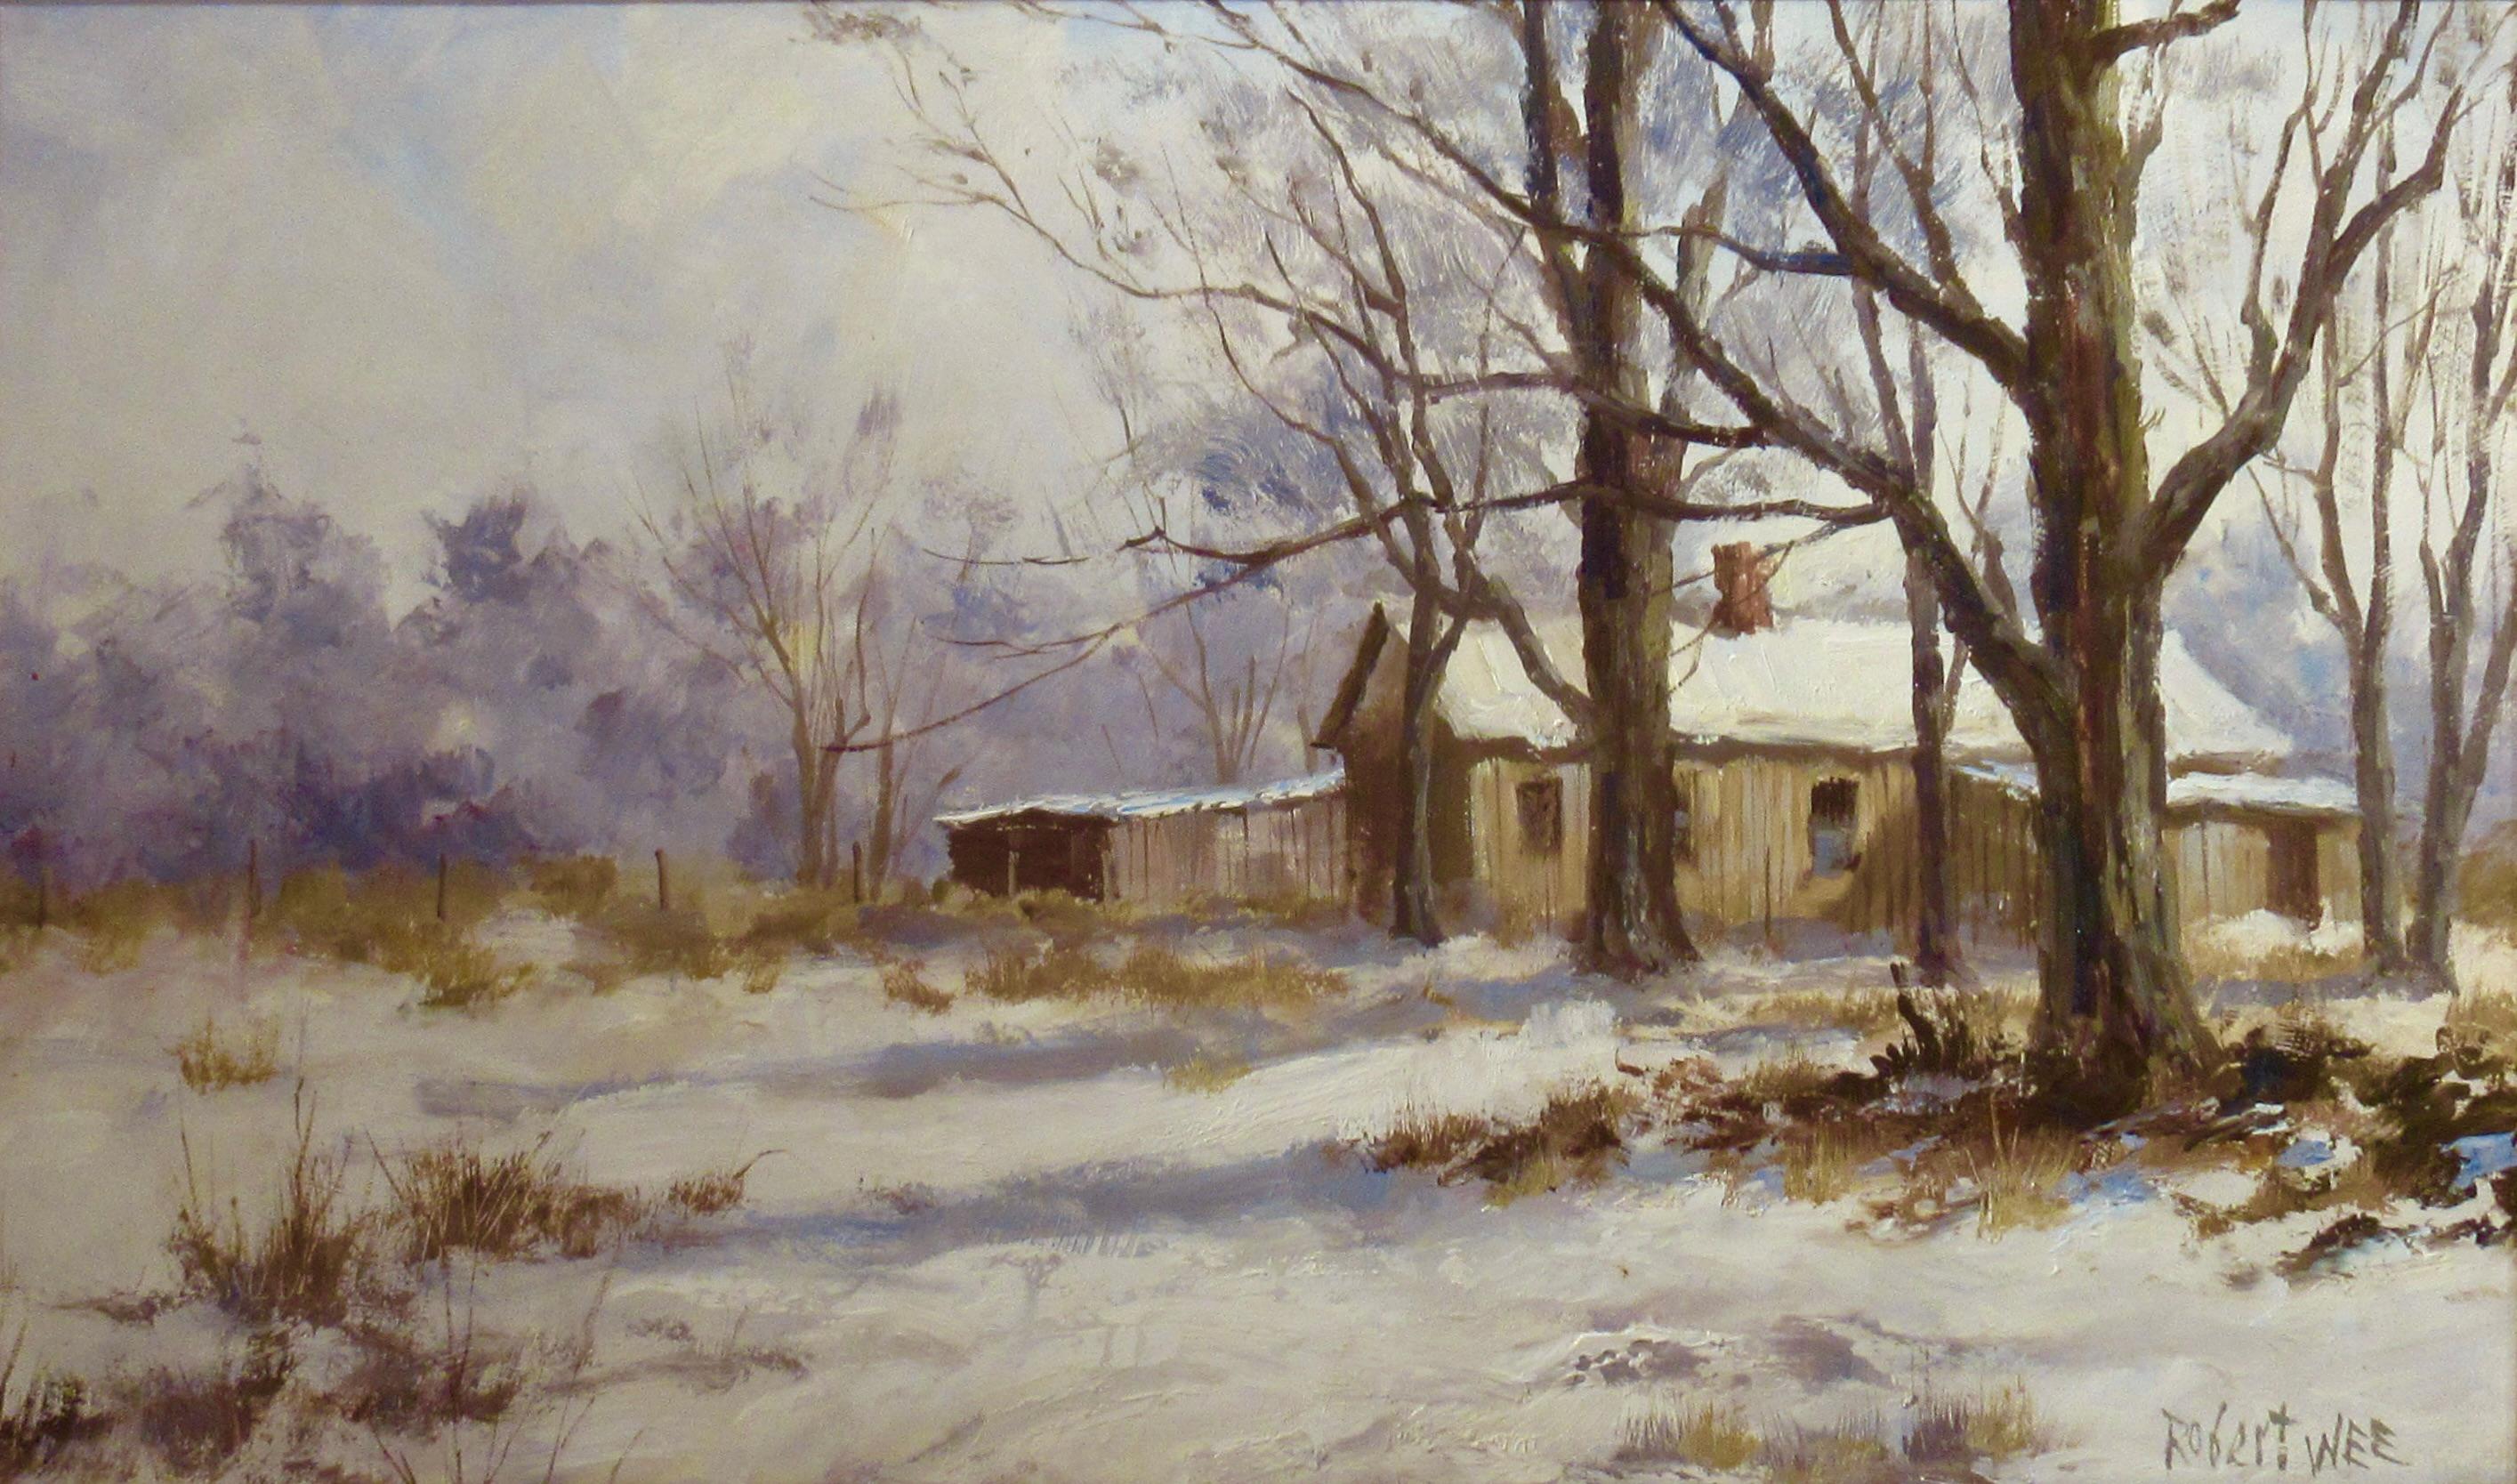 Landscape with Snow - Painting by Robert Wee